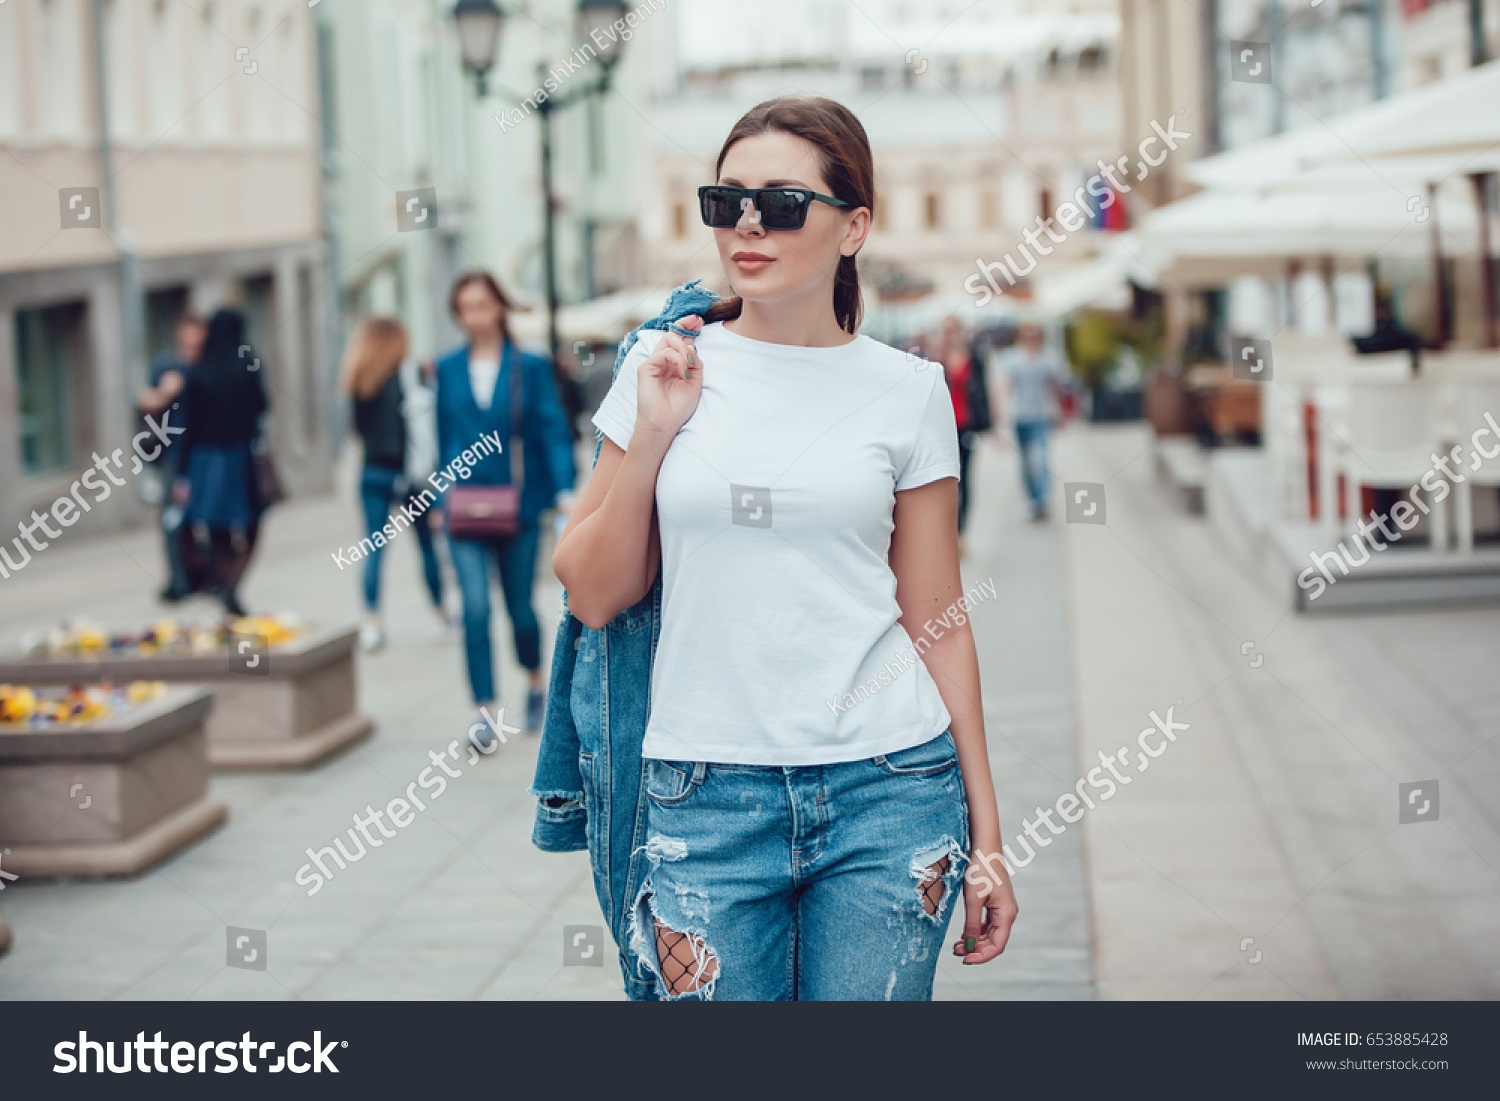 Attractive girl in sunglasses walking along the street. White t-shirt. Mock-up. #653885428